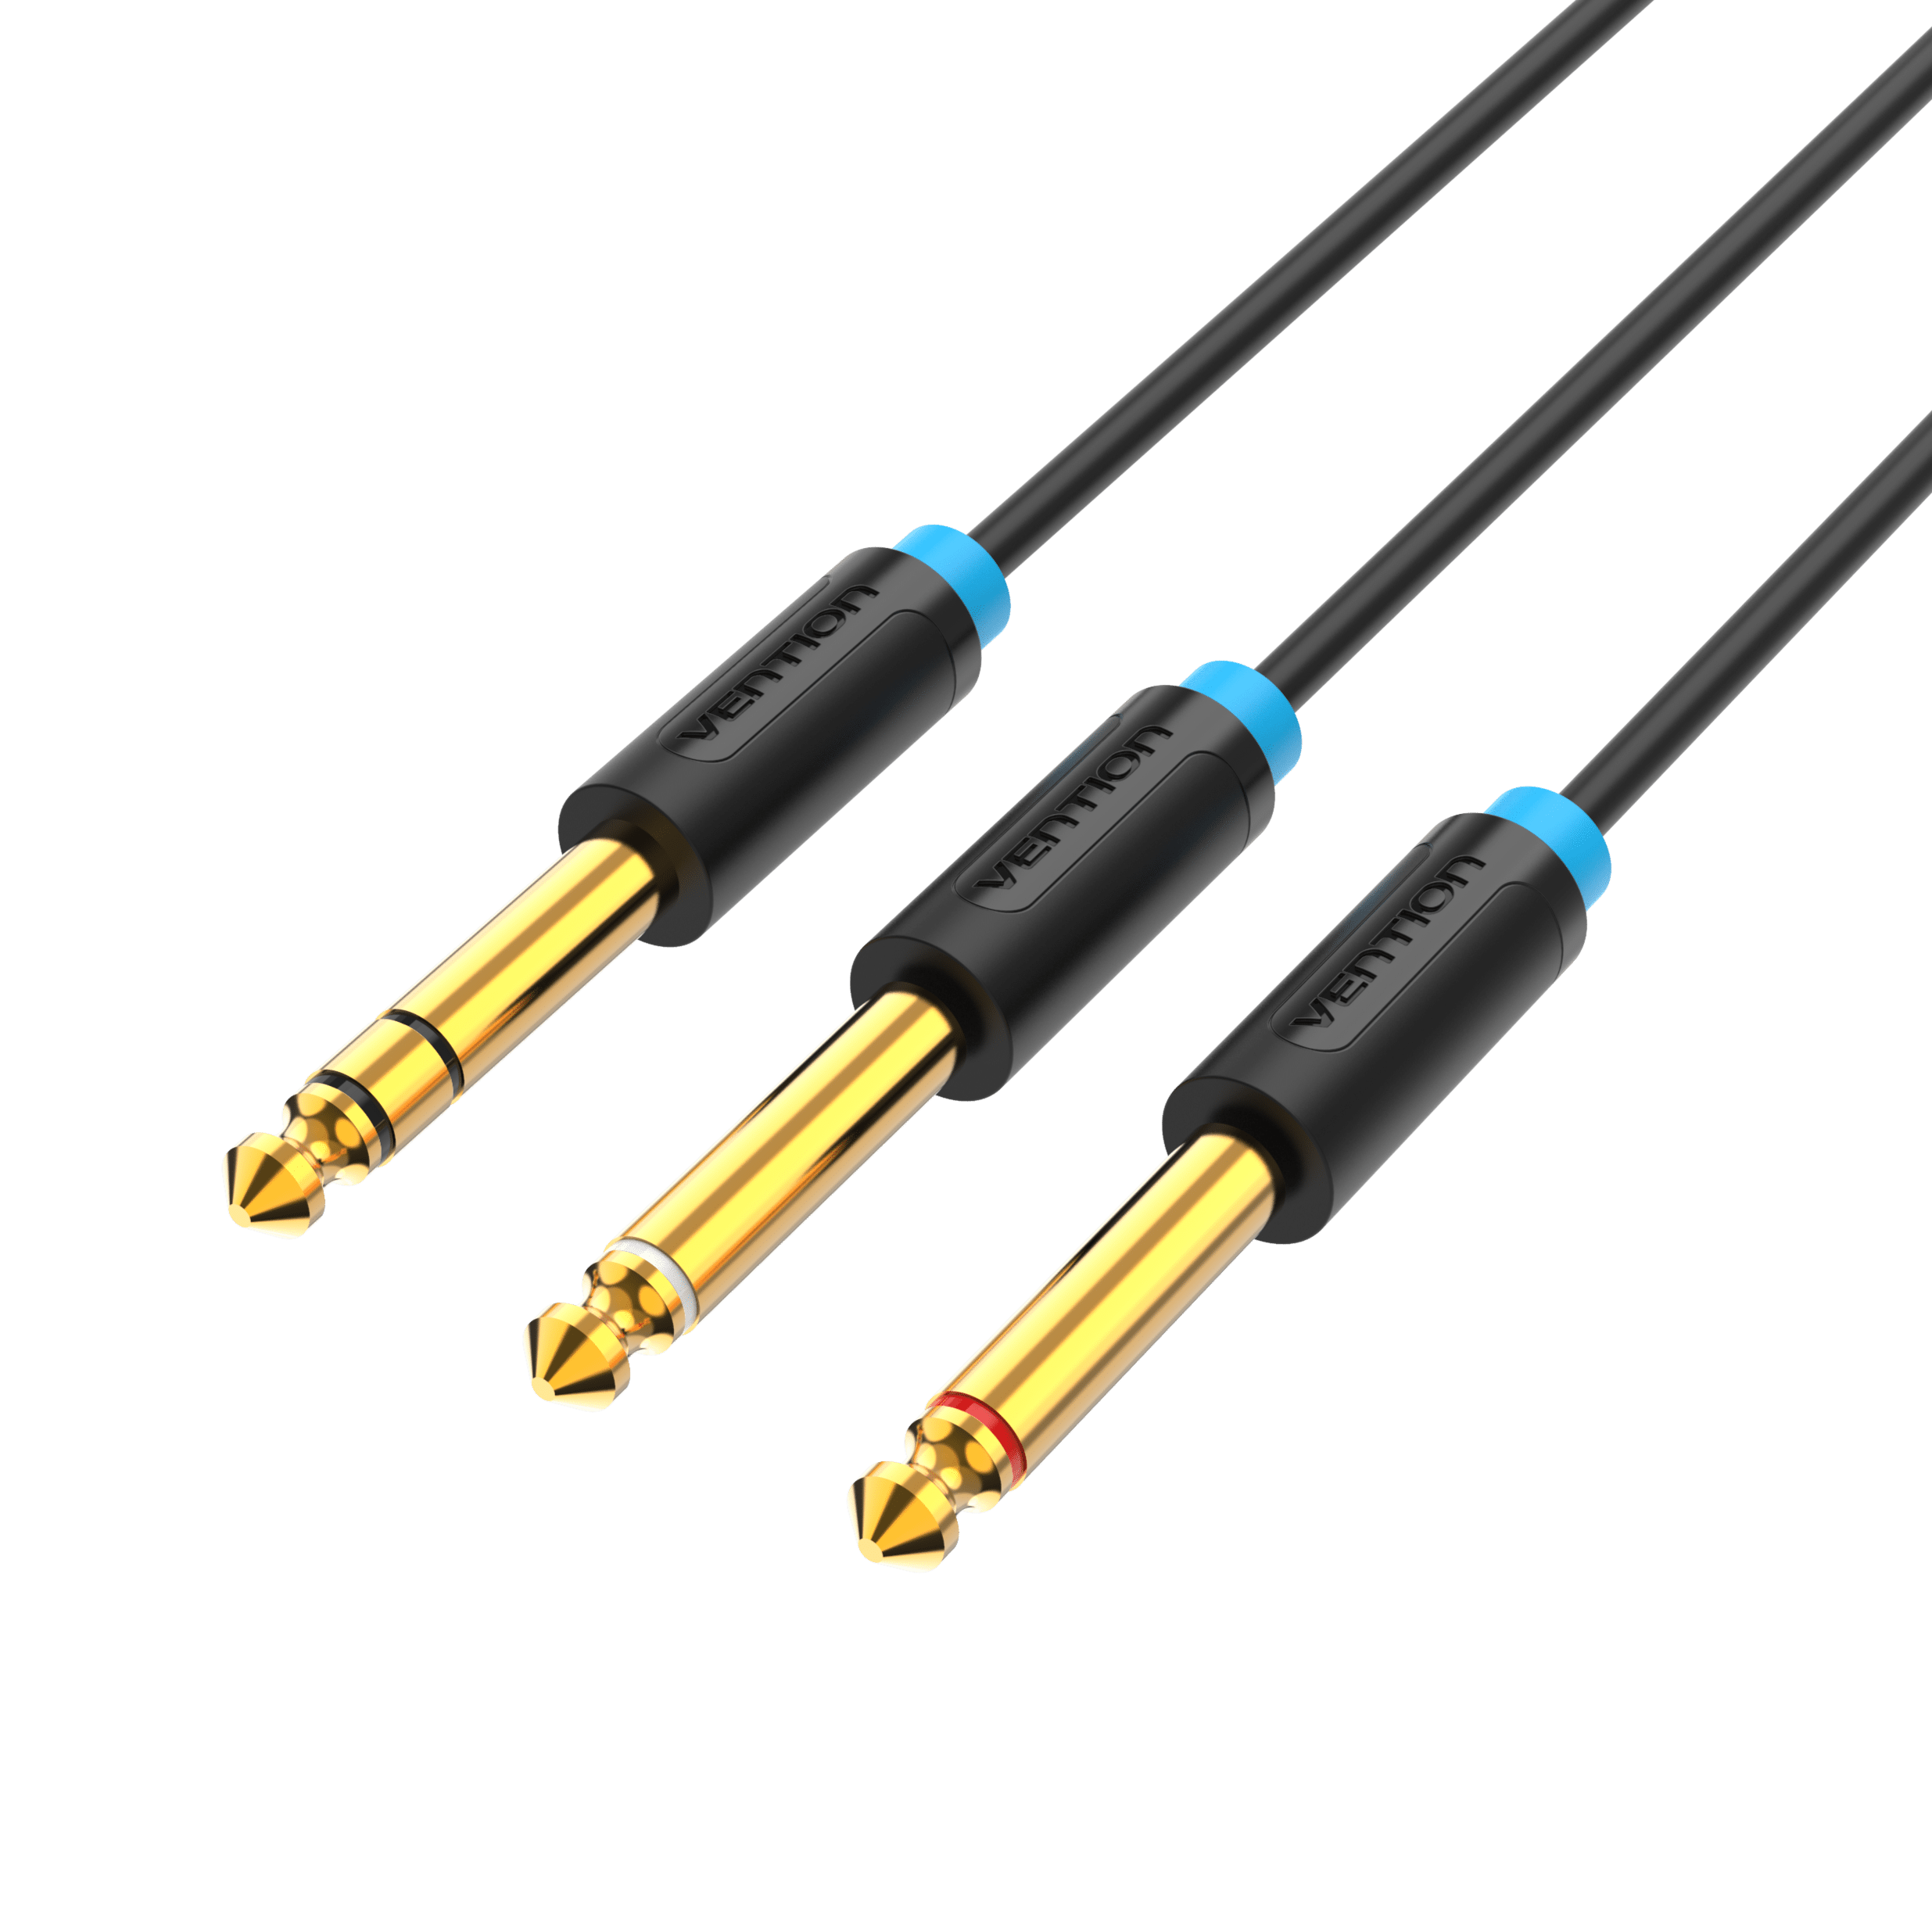 VENTION 速卖通 6.5mm to Double 6.5mm Audio Cable Male to Male Aux Cable for Mixer Speaker Amplifier 6.5 to 6.5 TRS Cable Audio